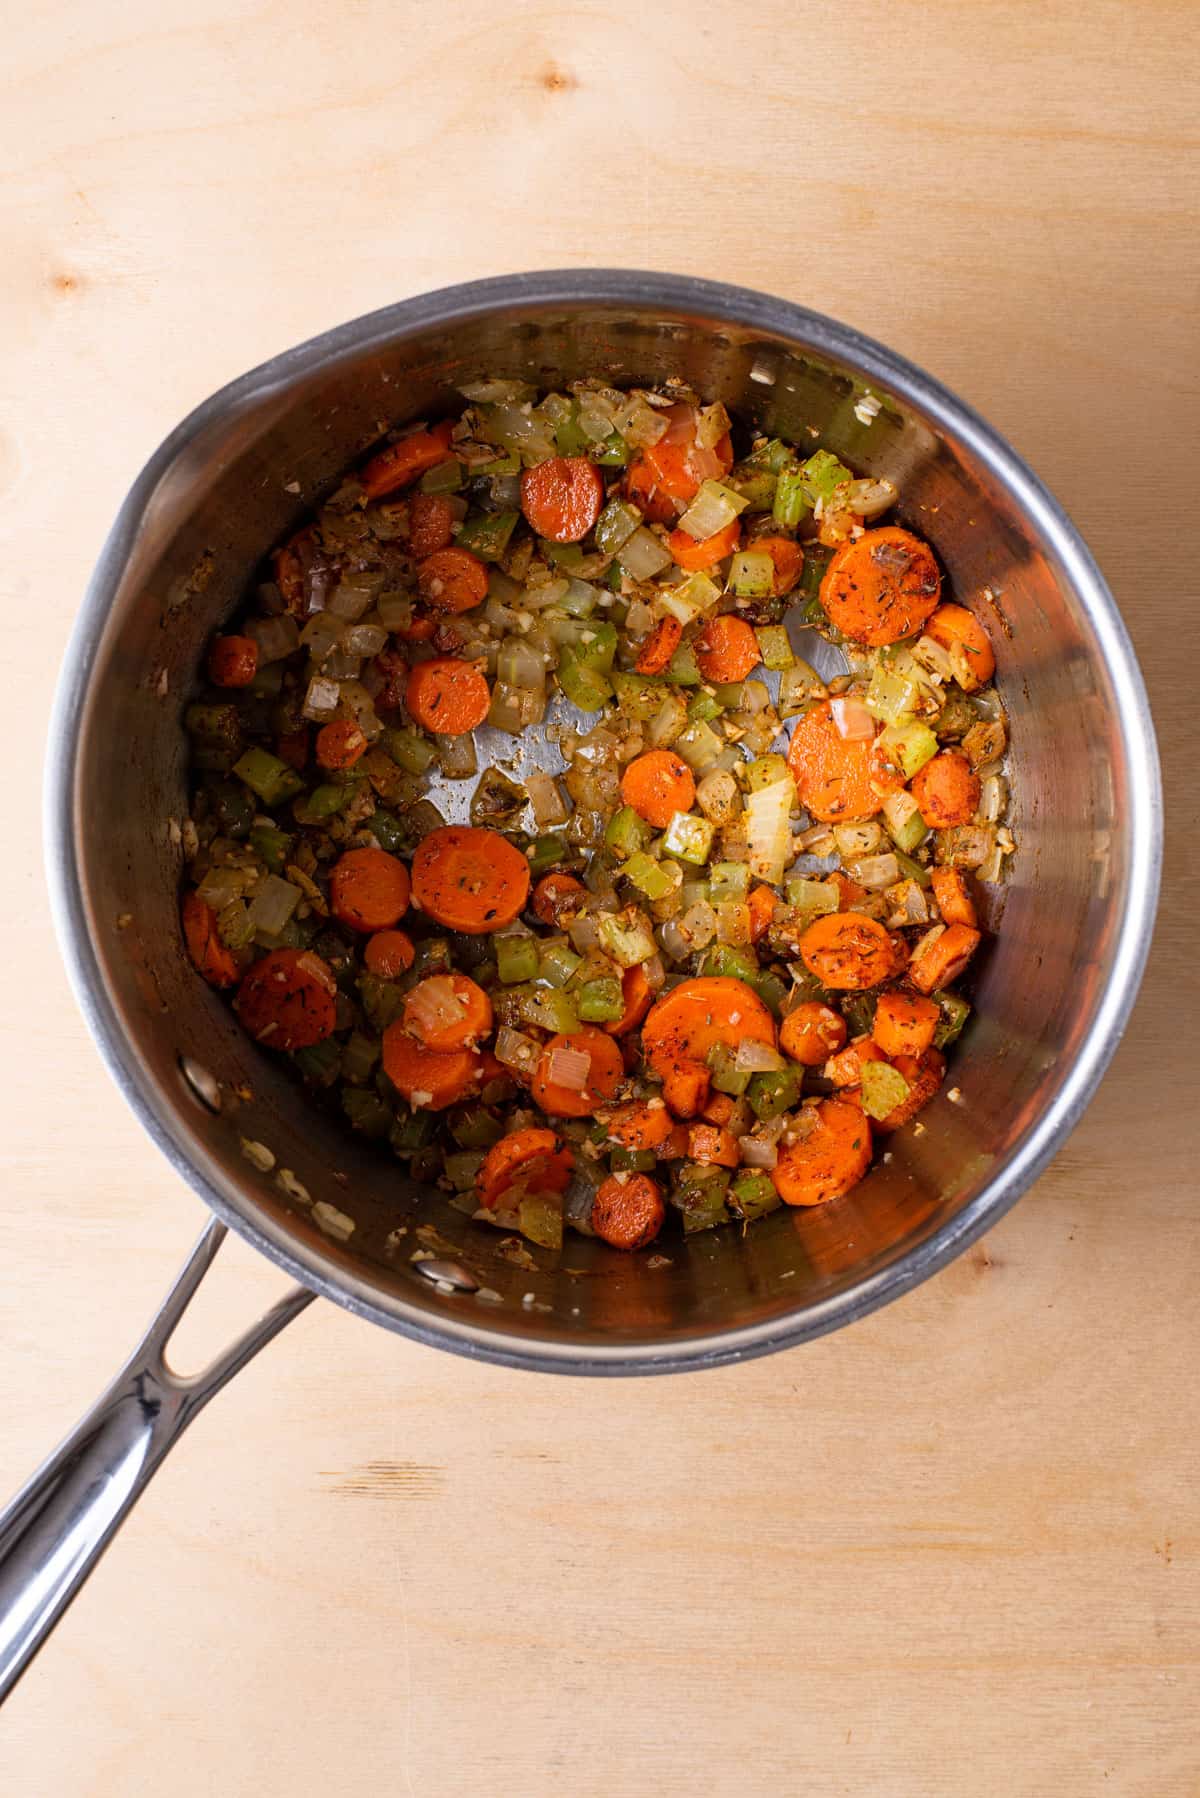 Sauteed mirepoix in a pot.